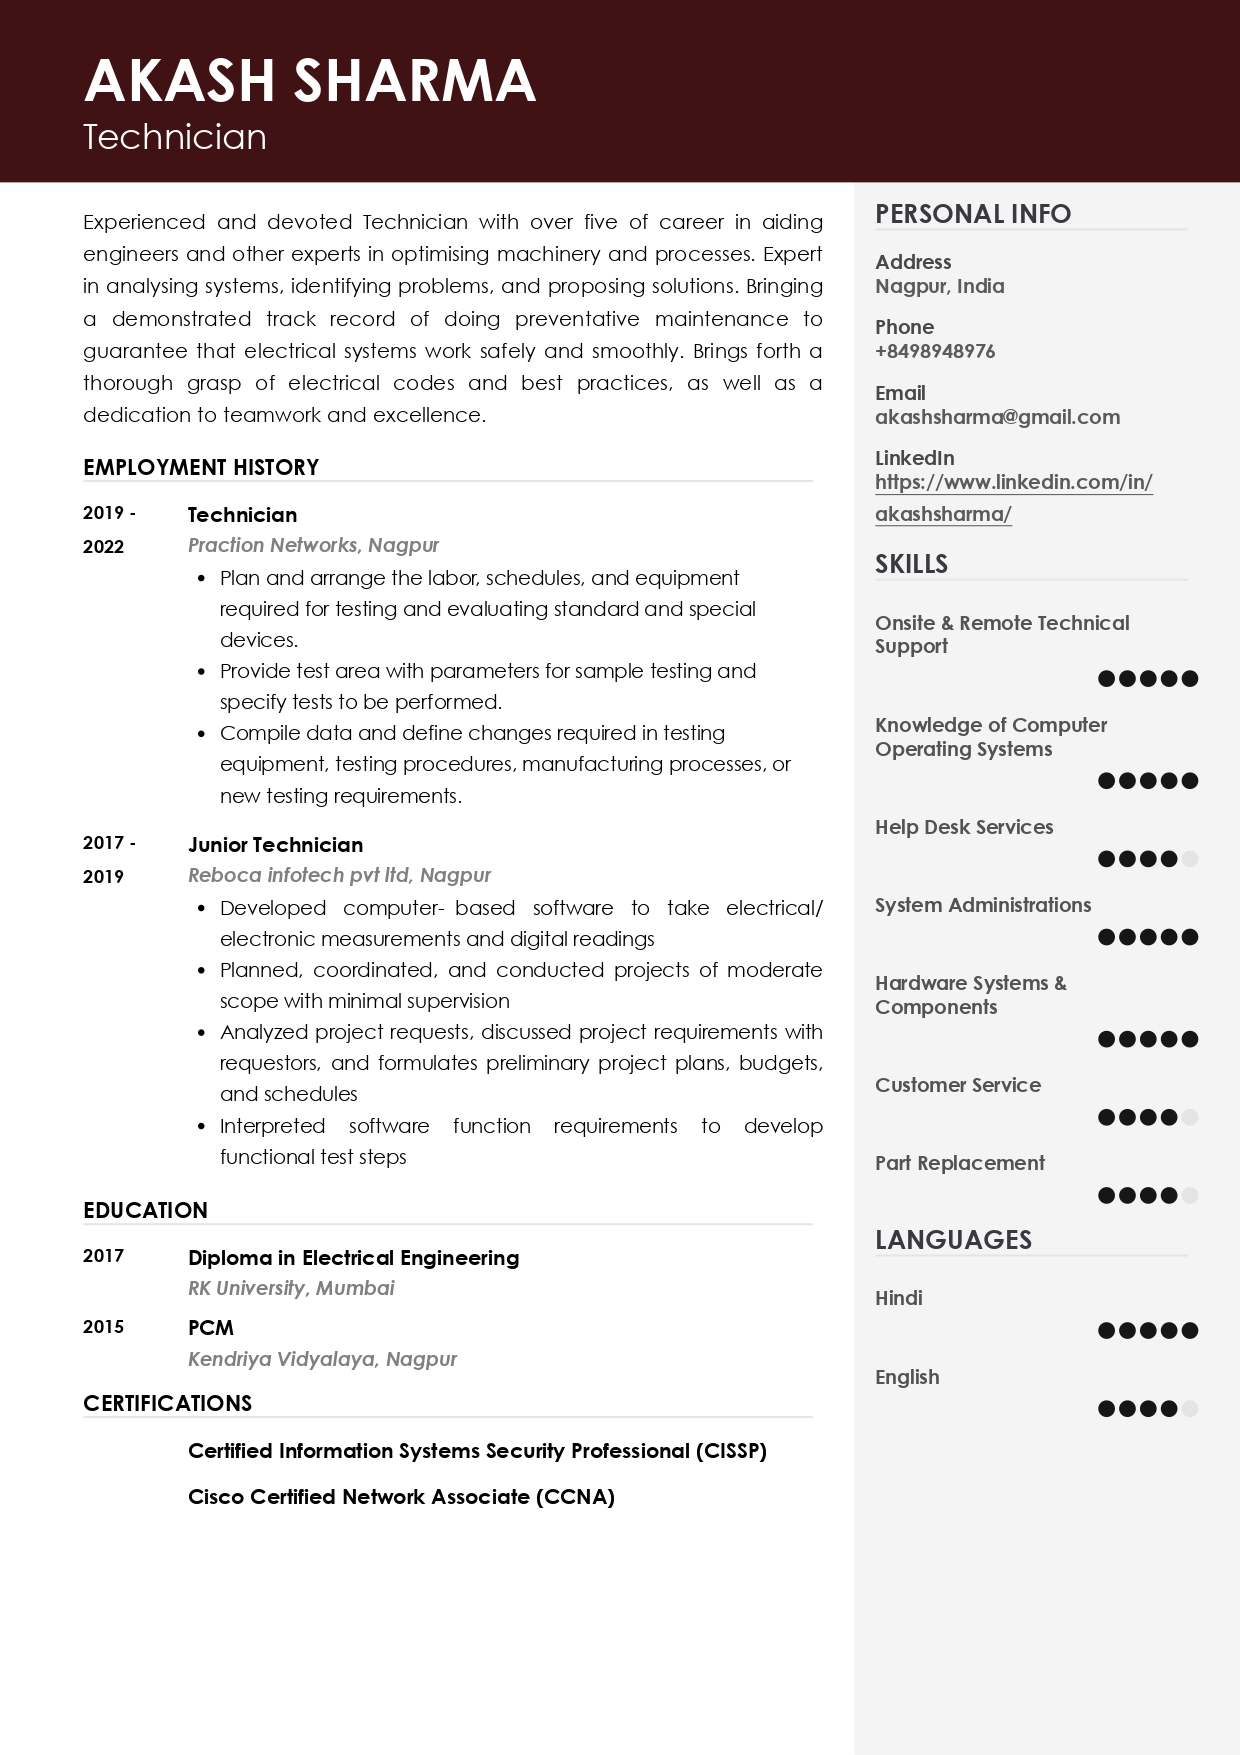 Sample Resume of Technician | Free Resume Templates & Samples on Resumod.co